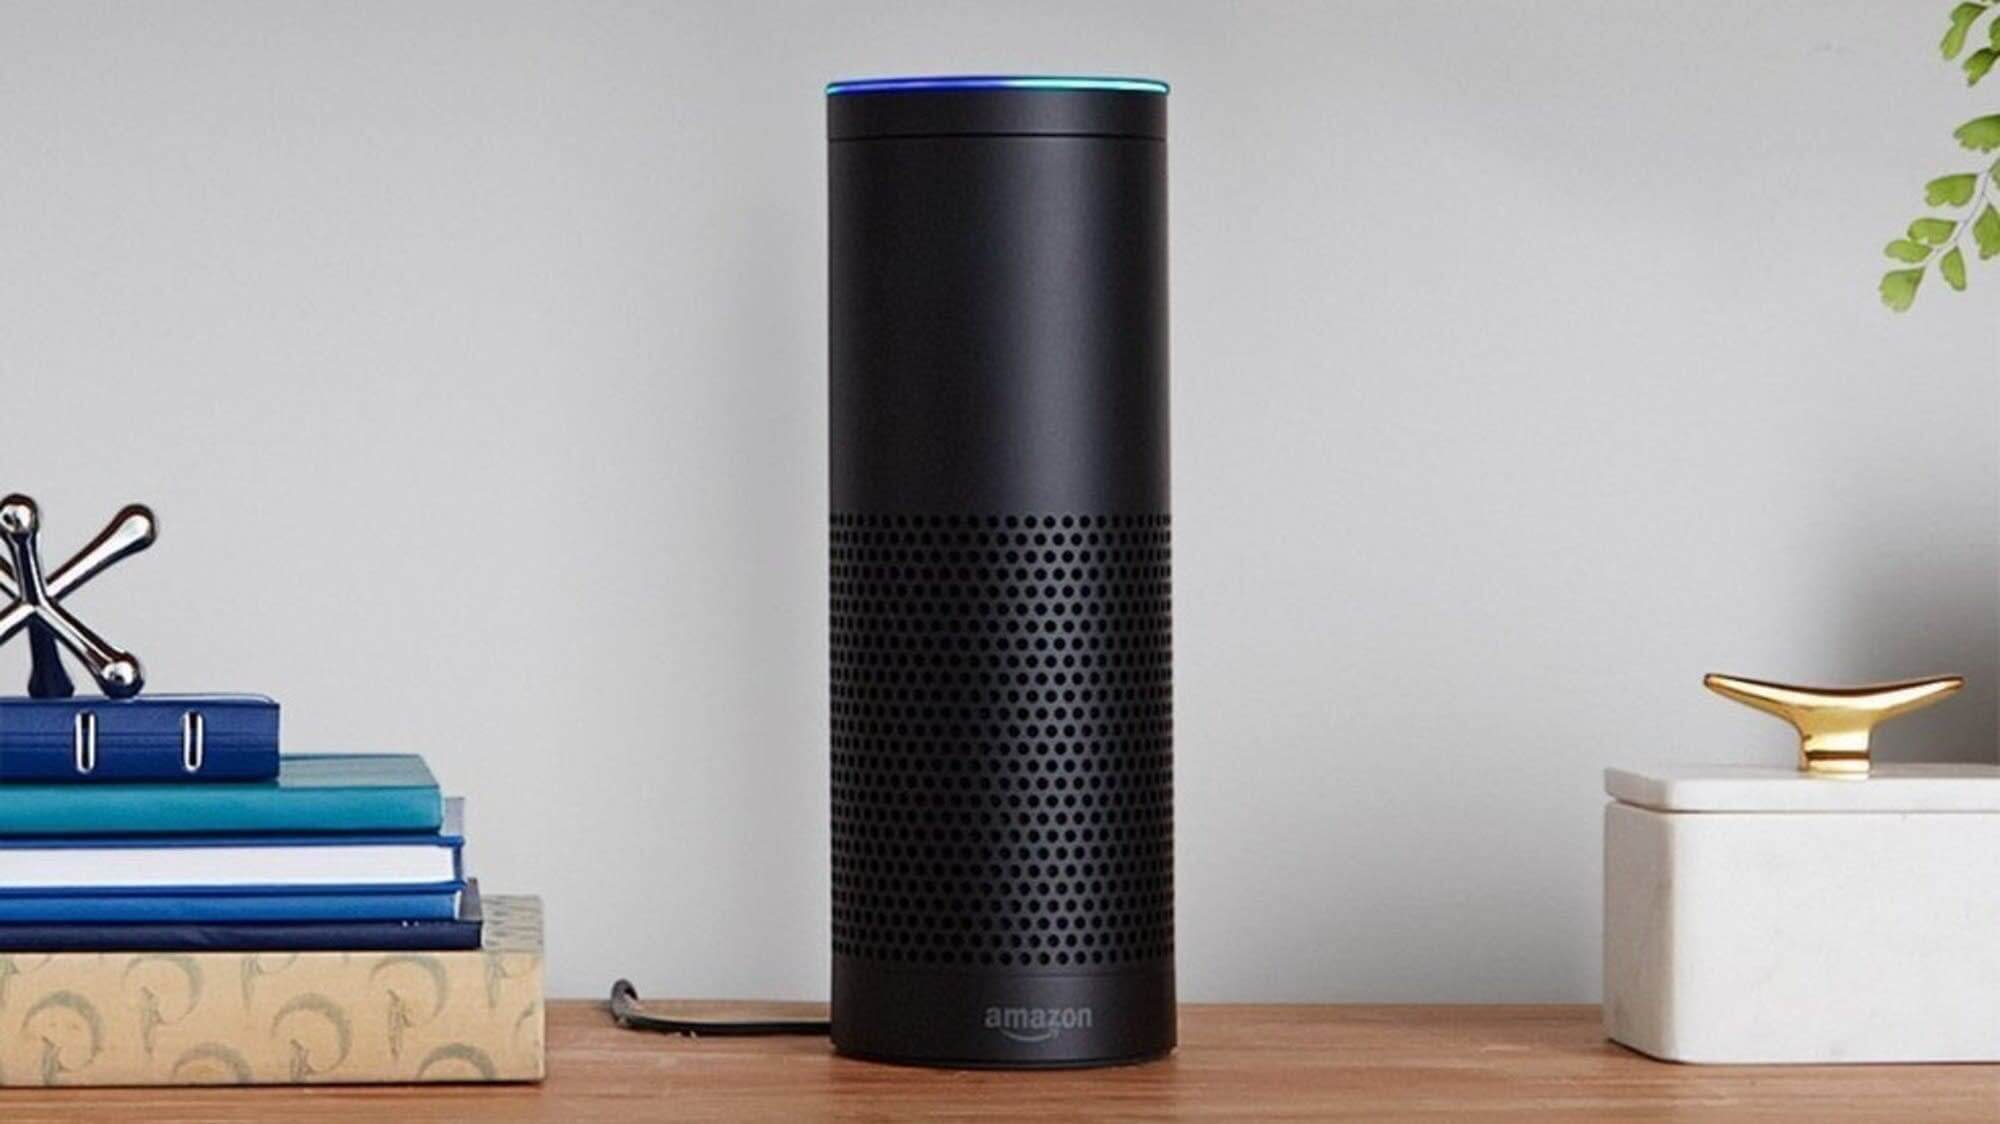 Amazon maintains a significant lead in smart speaker market